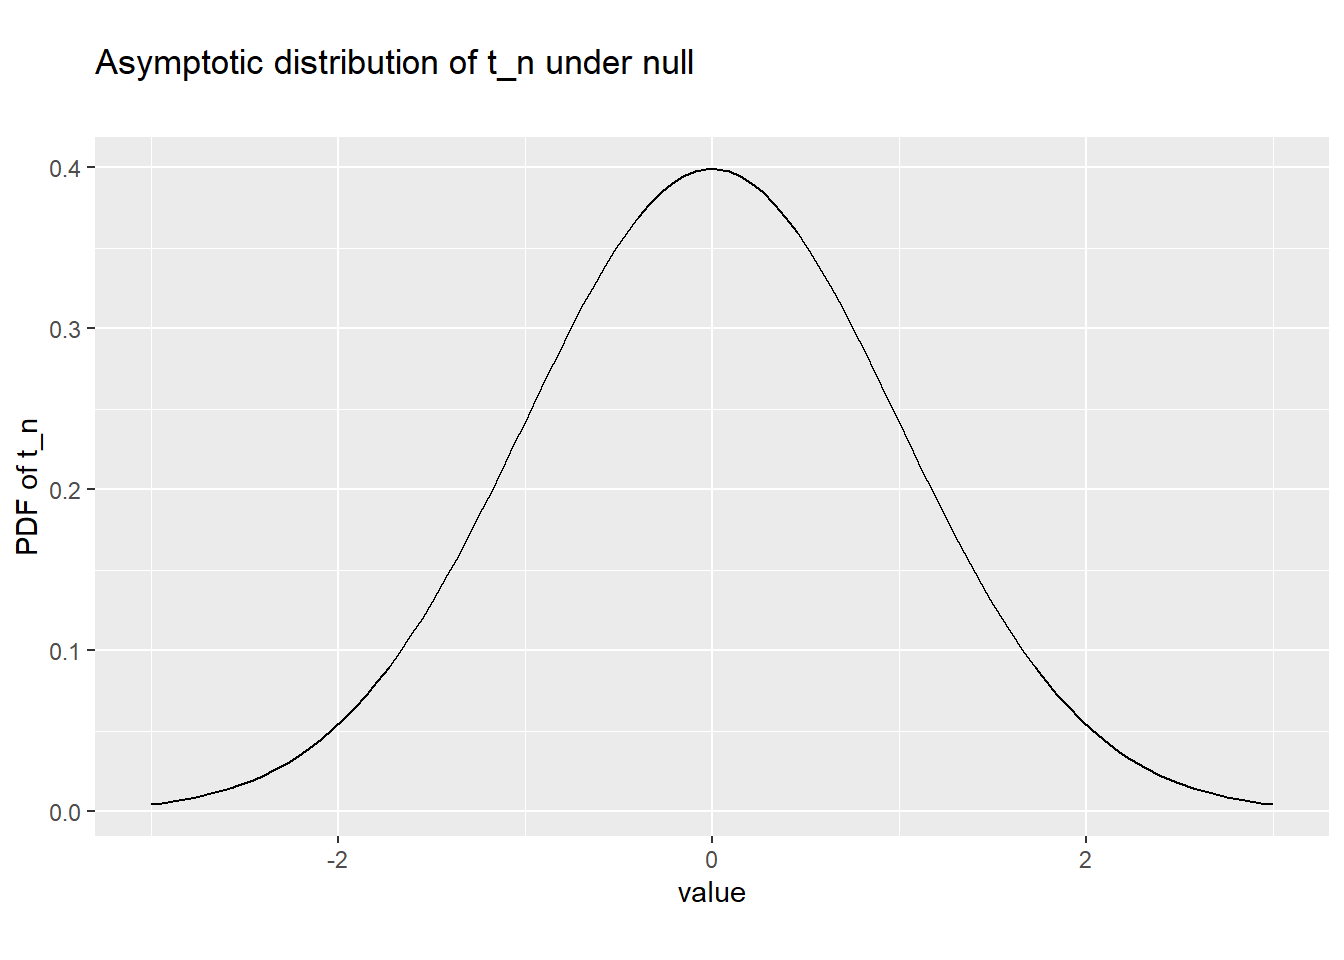 *Asymptotic distribution of t_n under the null*